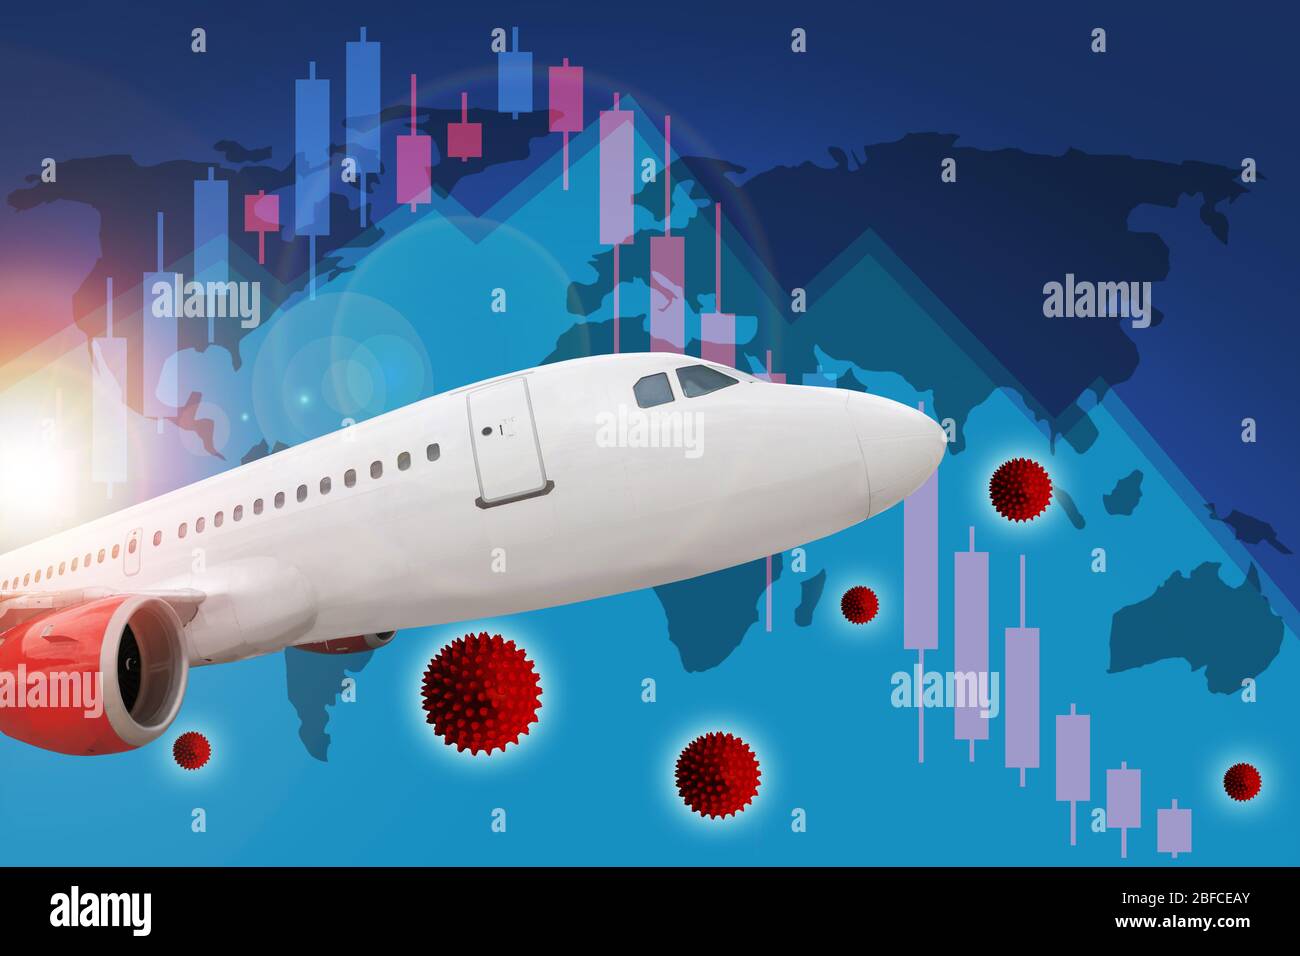 Worldwide Covid-19 coronavirus pandemic impact on the business profitability of airline and travel tourism industry as illustrated by the declining st Stock Photo